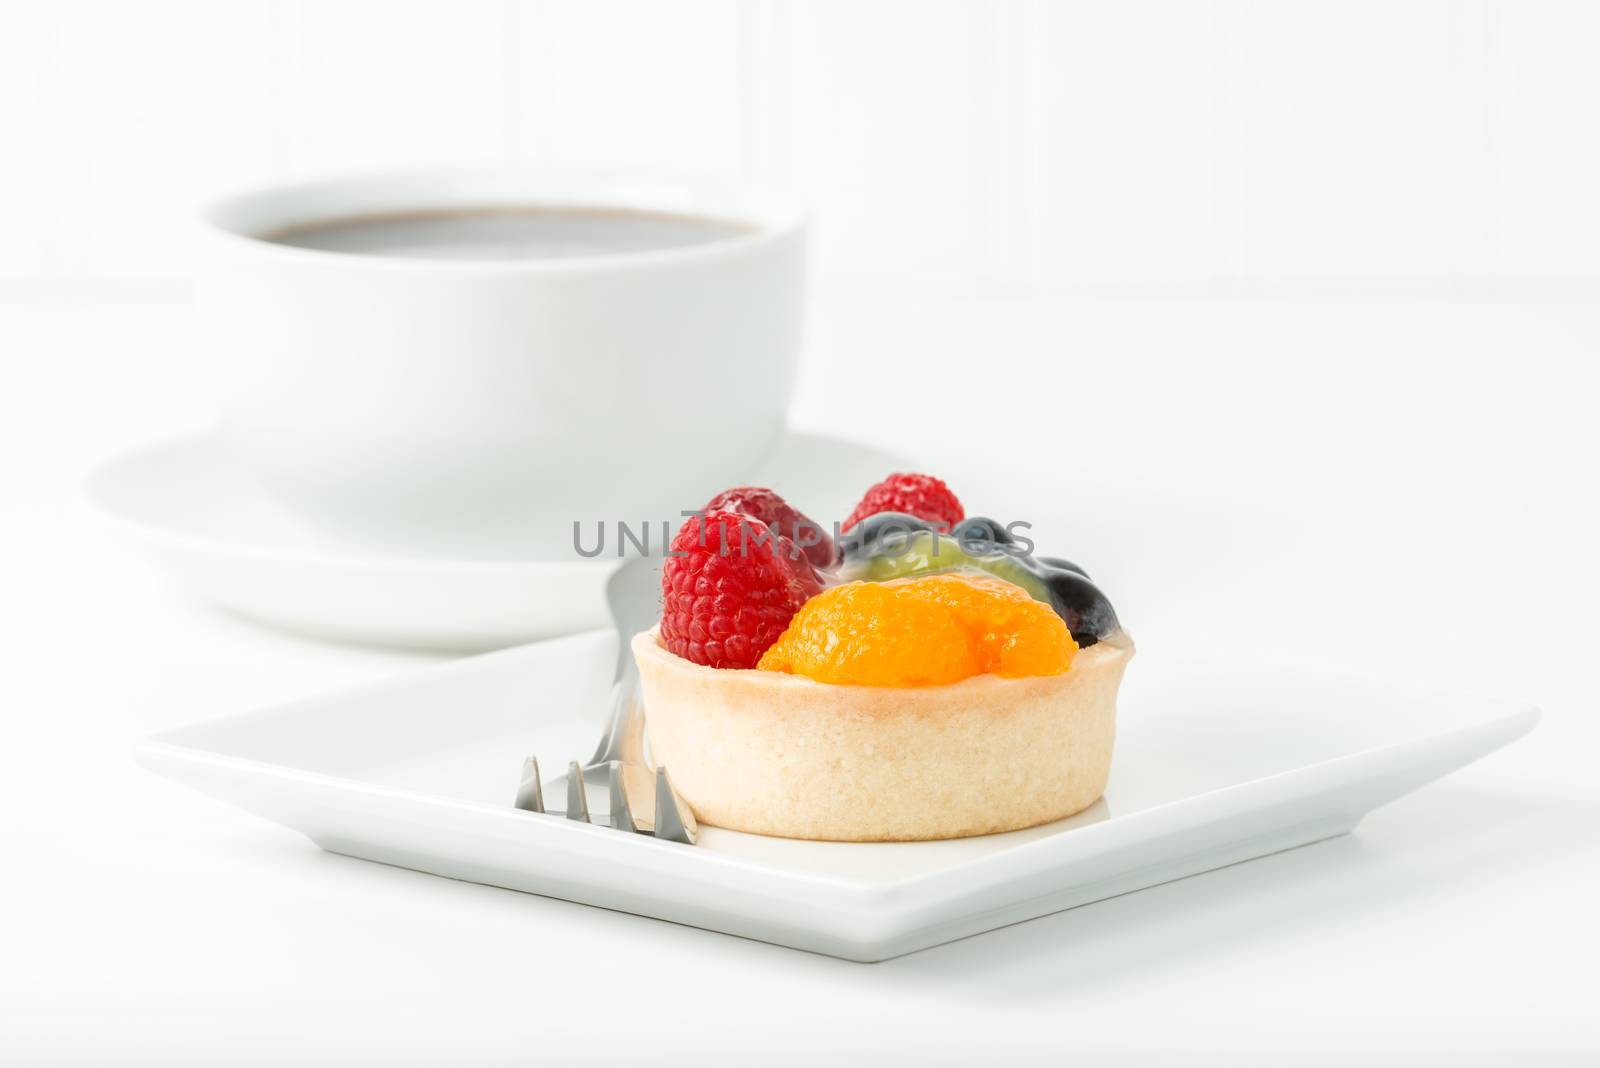 Colorful fresh fruit tart served with a cup of coffee.